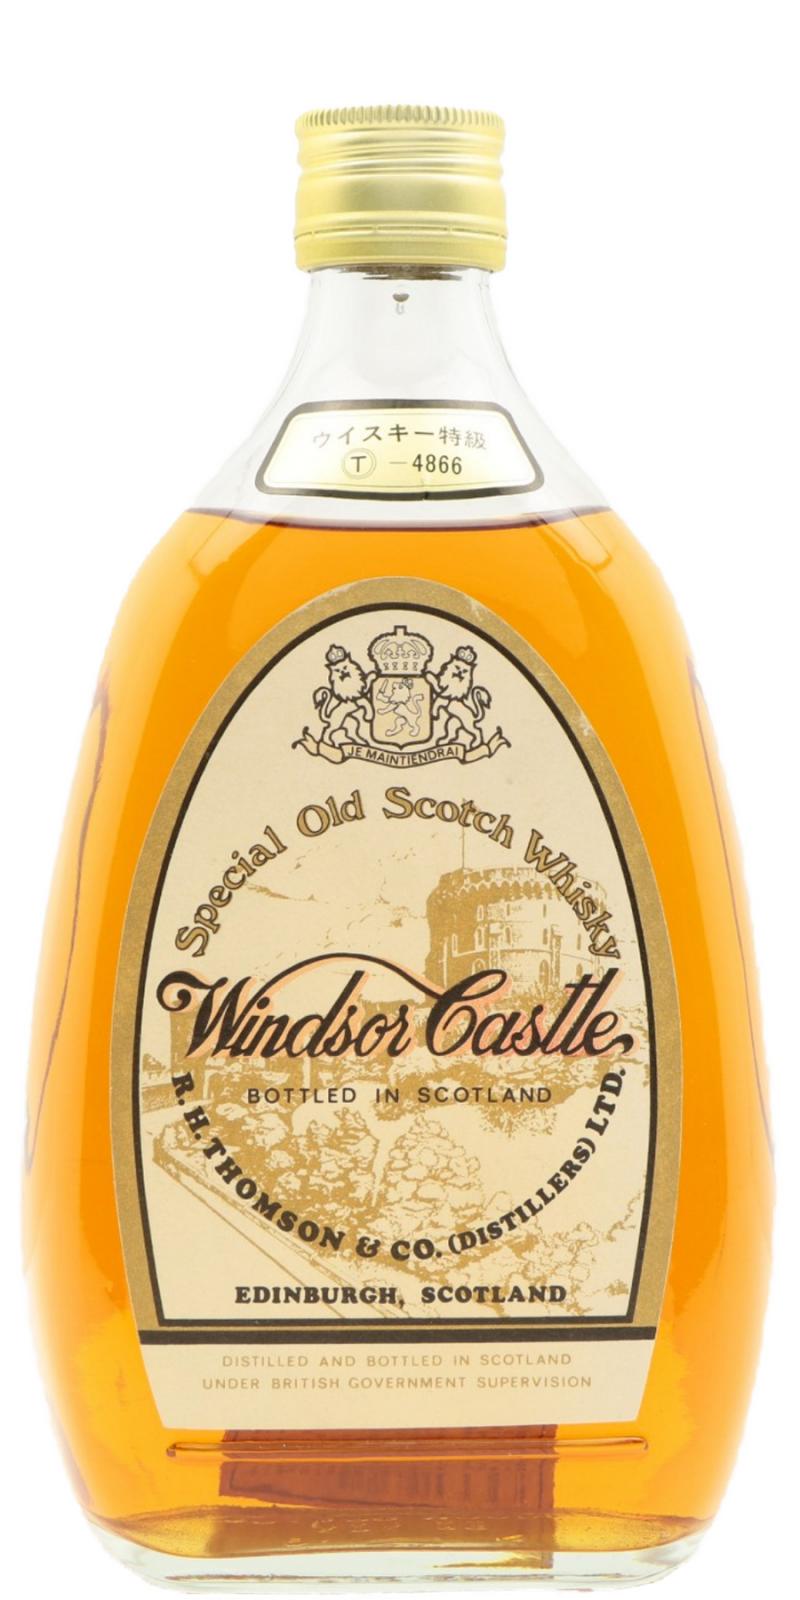 Windsor Castle Special Old Scotch Whisky 43% 750ml